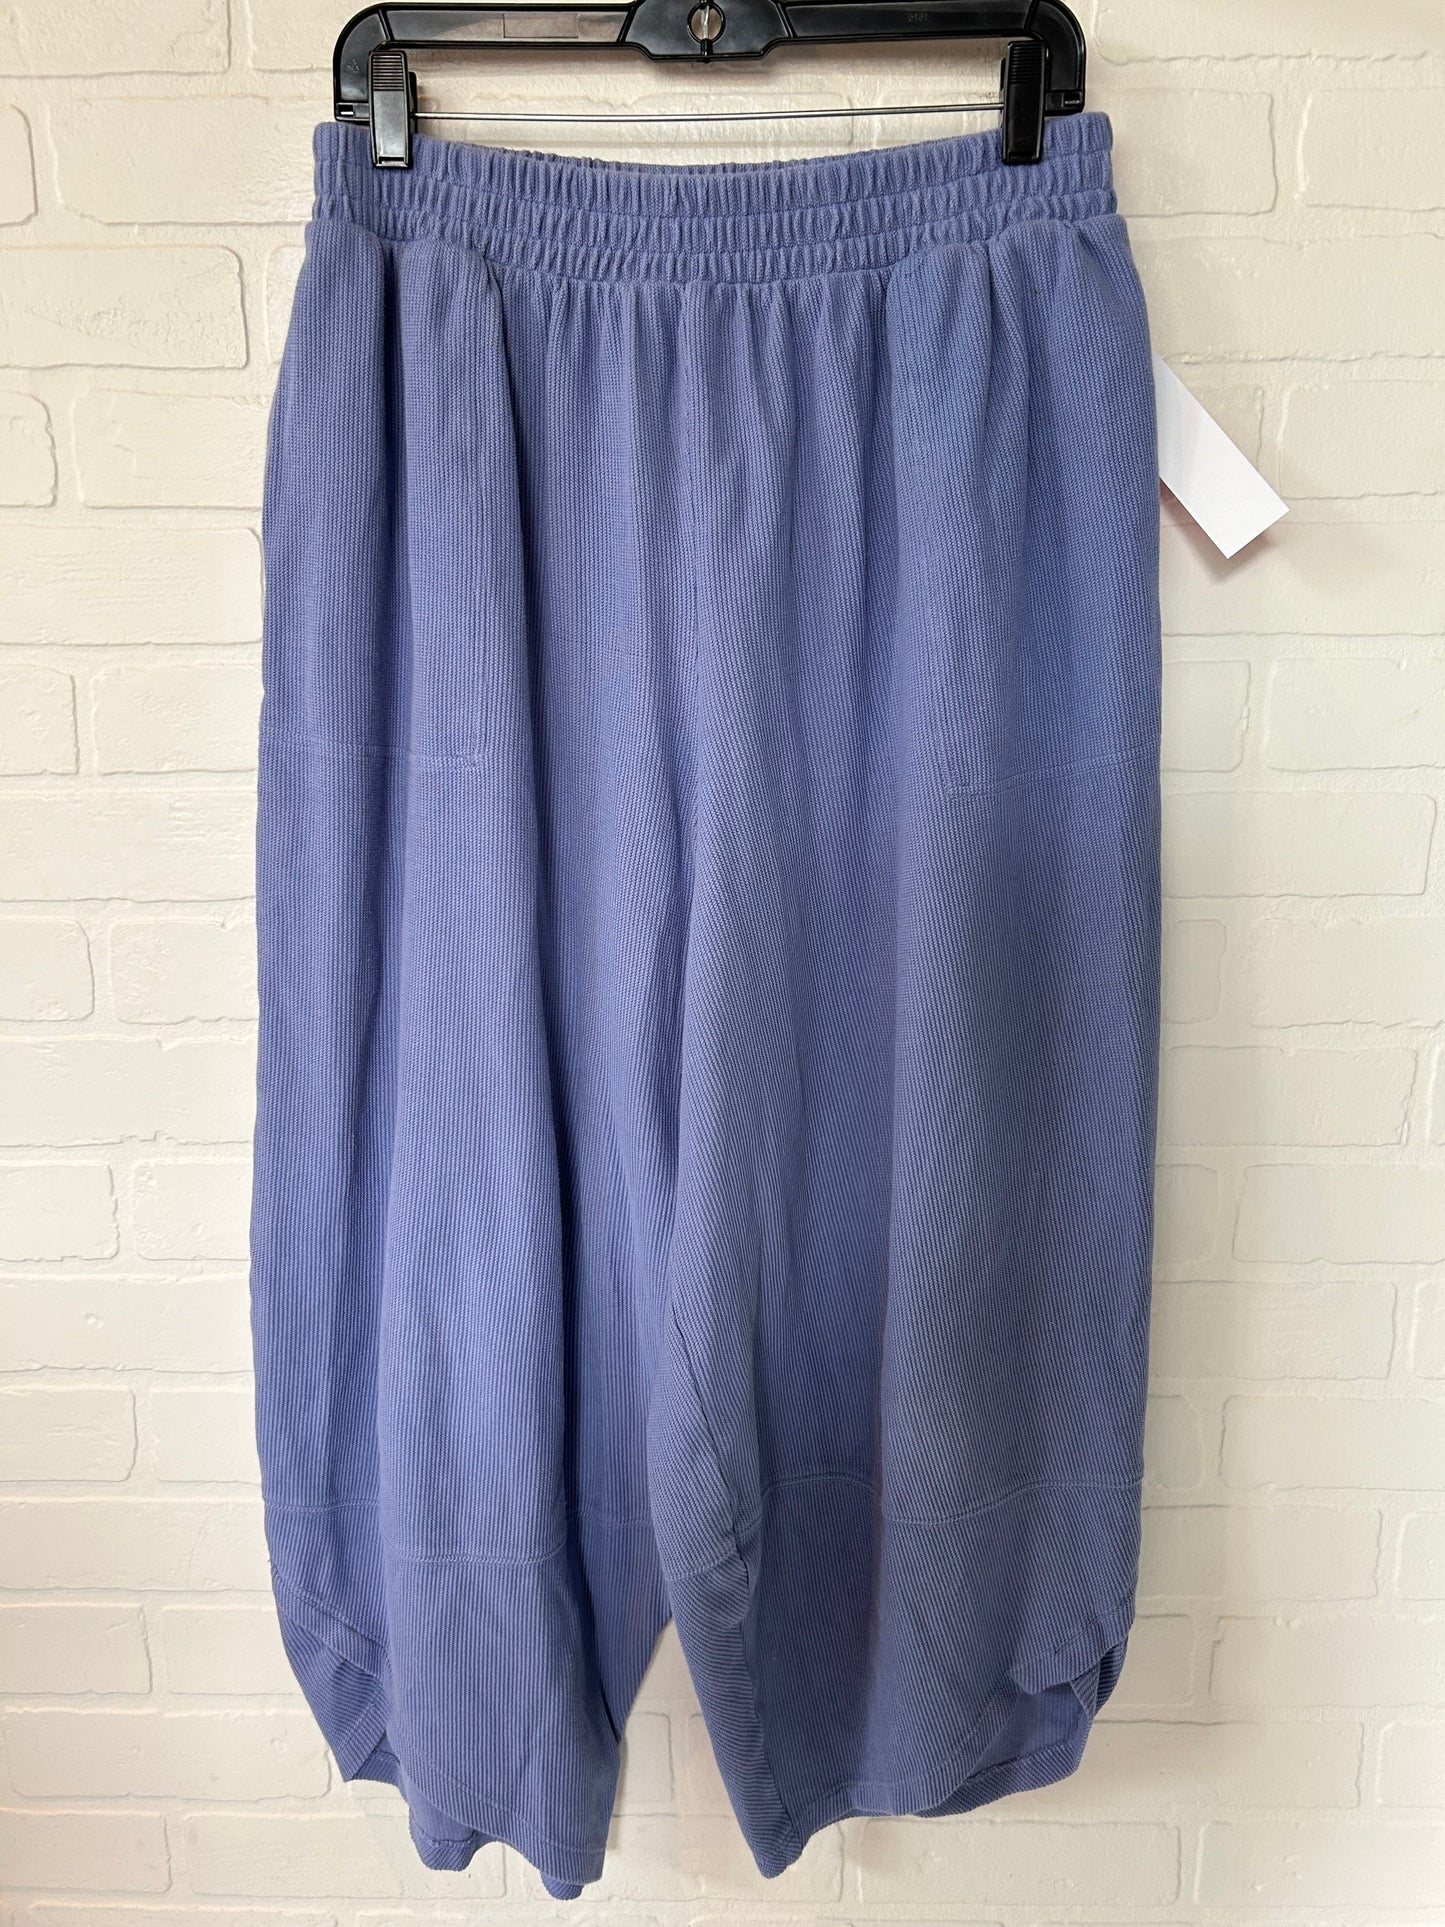 Blue Pants Other Free People, Size 12